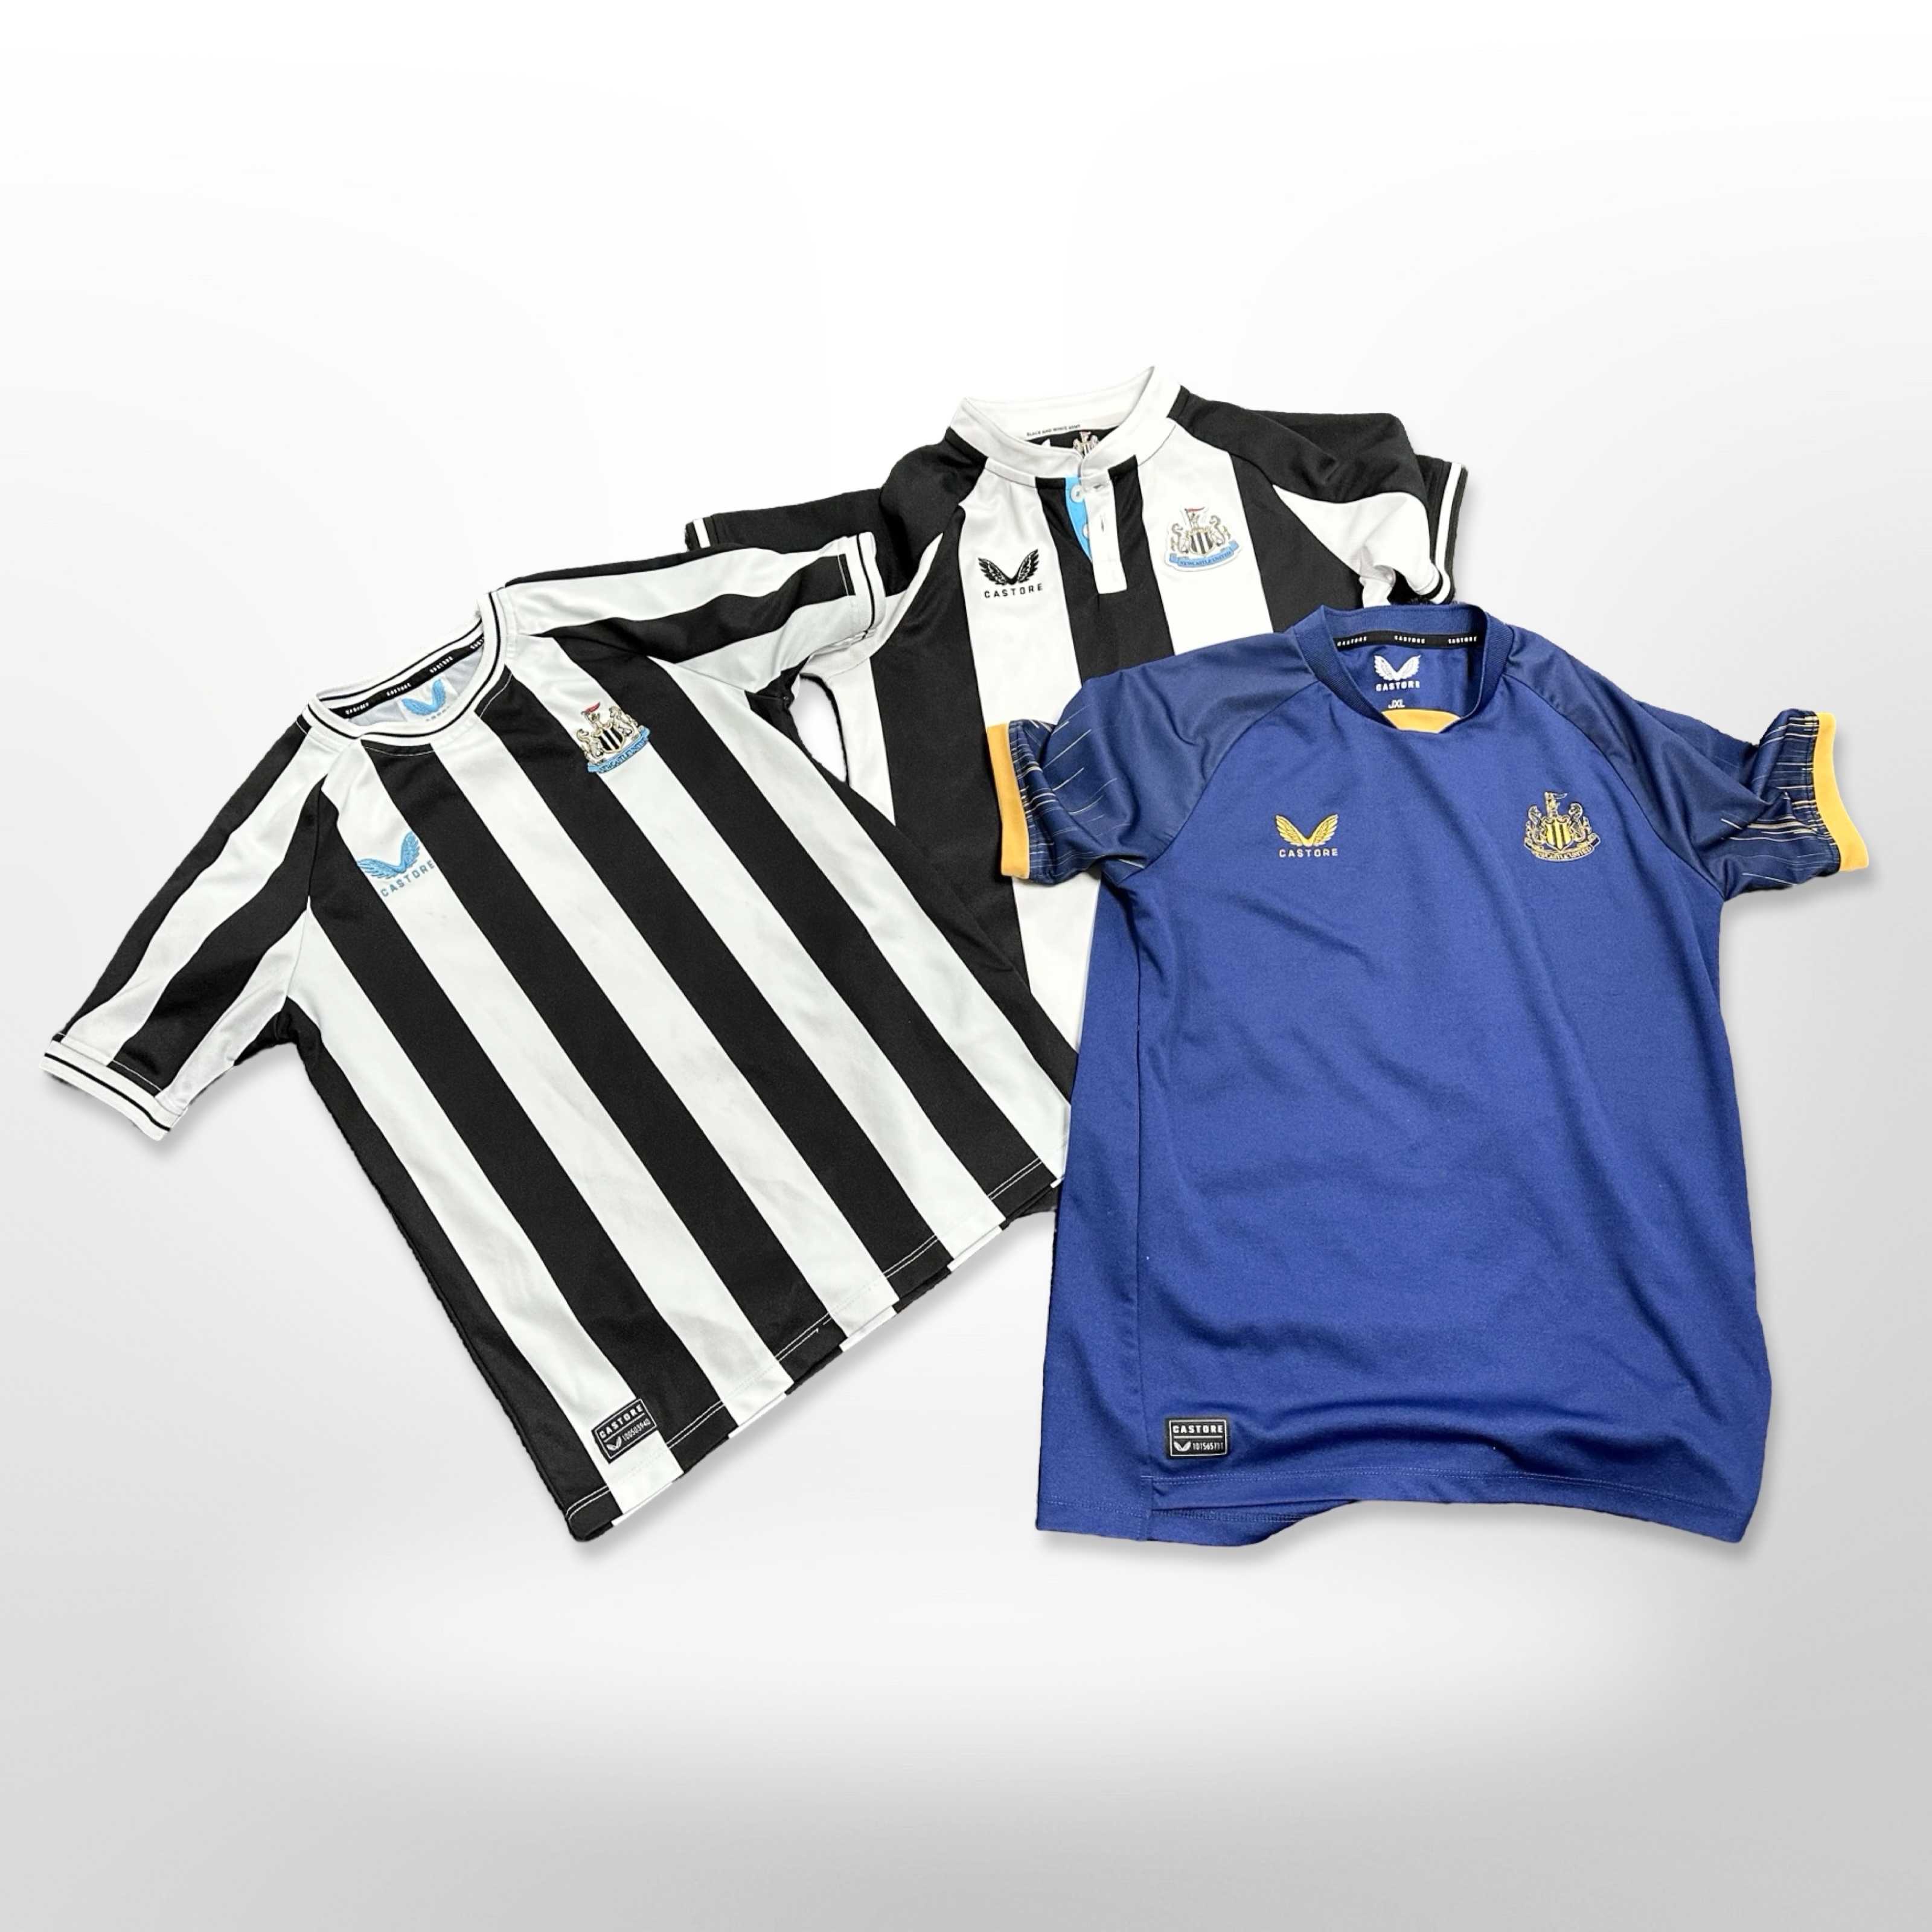 Three official Newcastle United football shirts,